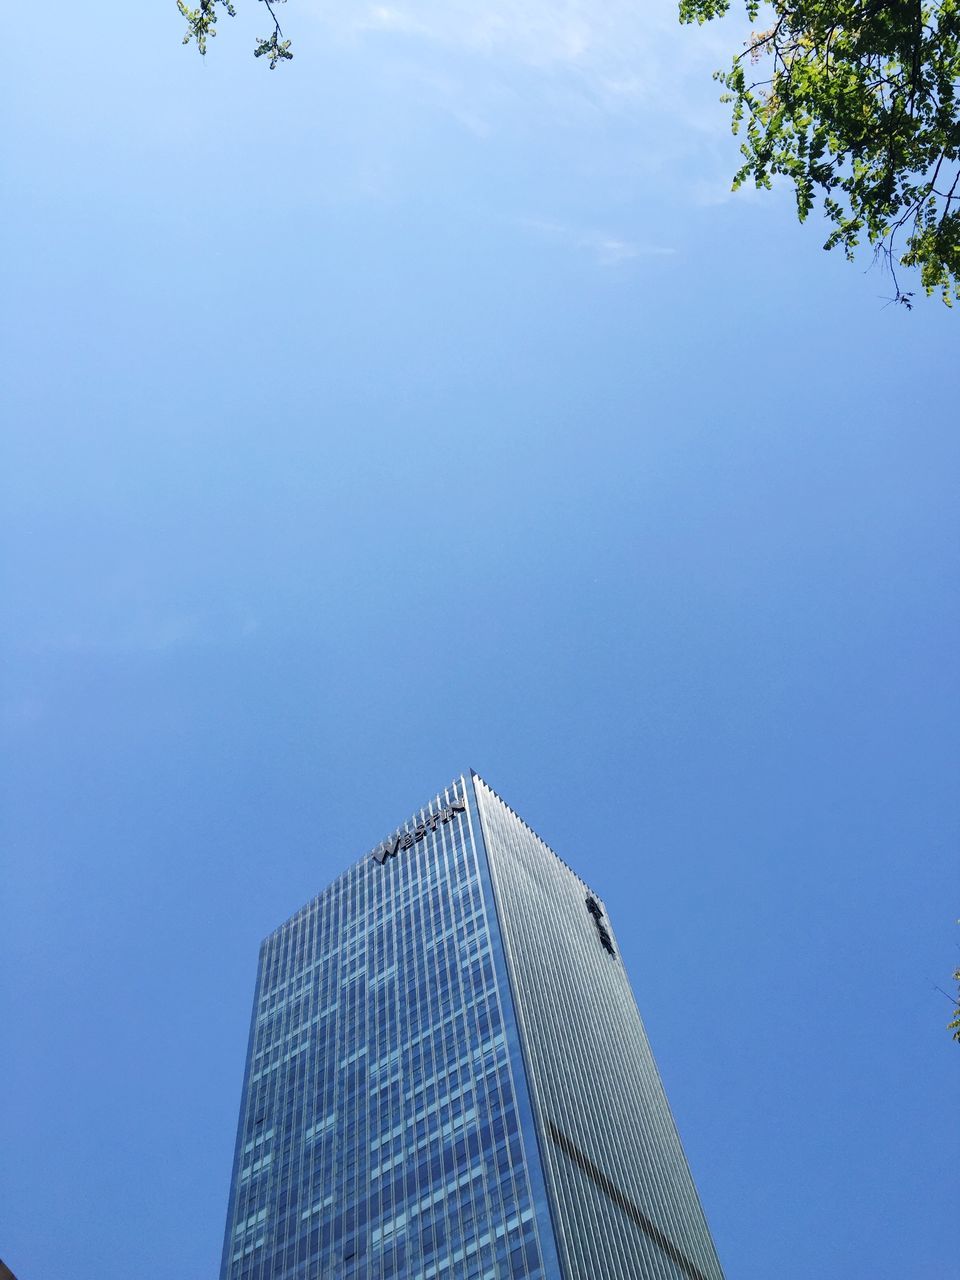 low angle view, building exterior, architecture, built structure, modern, office building, skyscraper, tall - high, city, sky, tower, building, blue, clear sky, day, outdoors, copy space, tall, no people, directly below